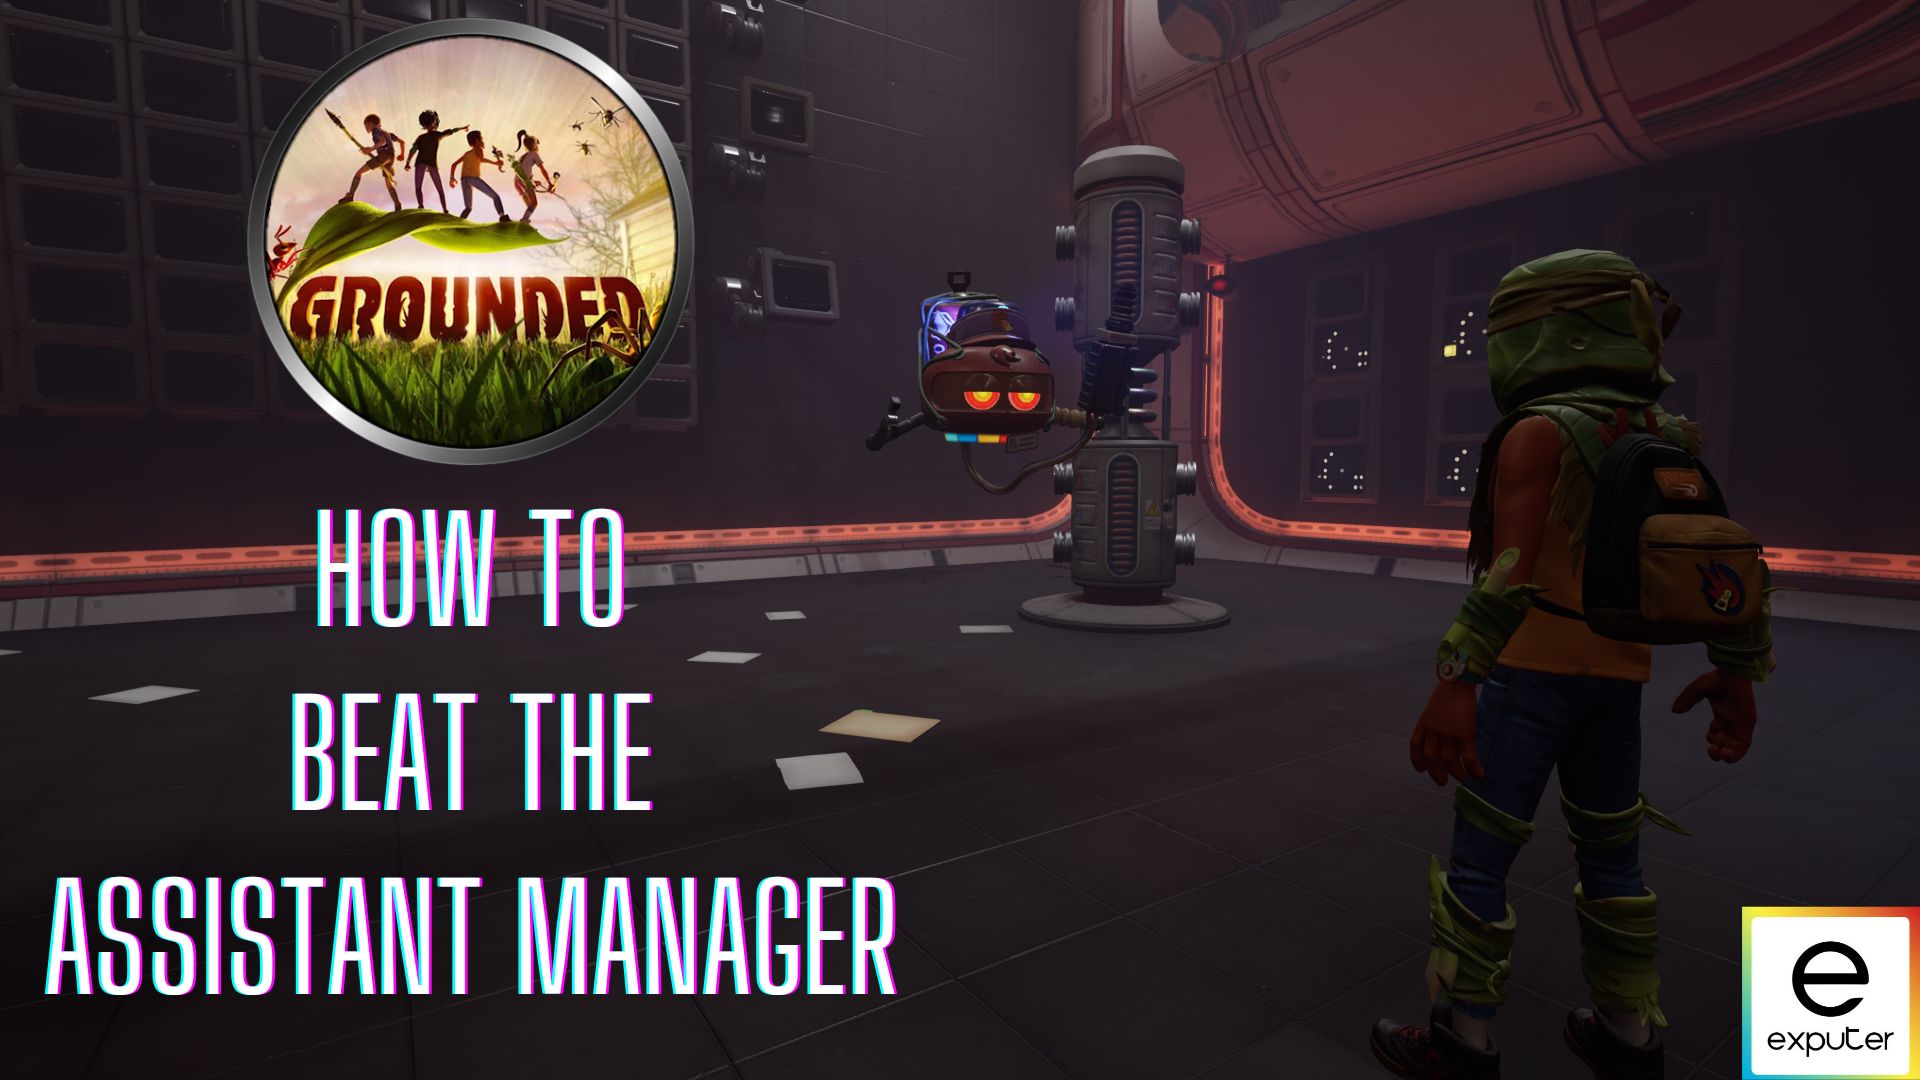 Grounded: How To Beat The Assistant Manager